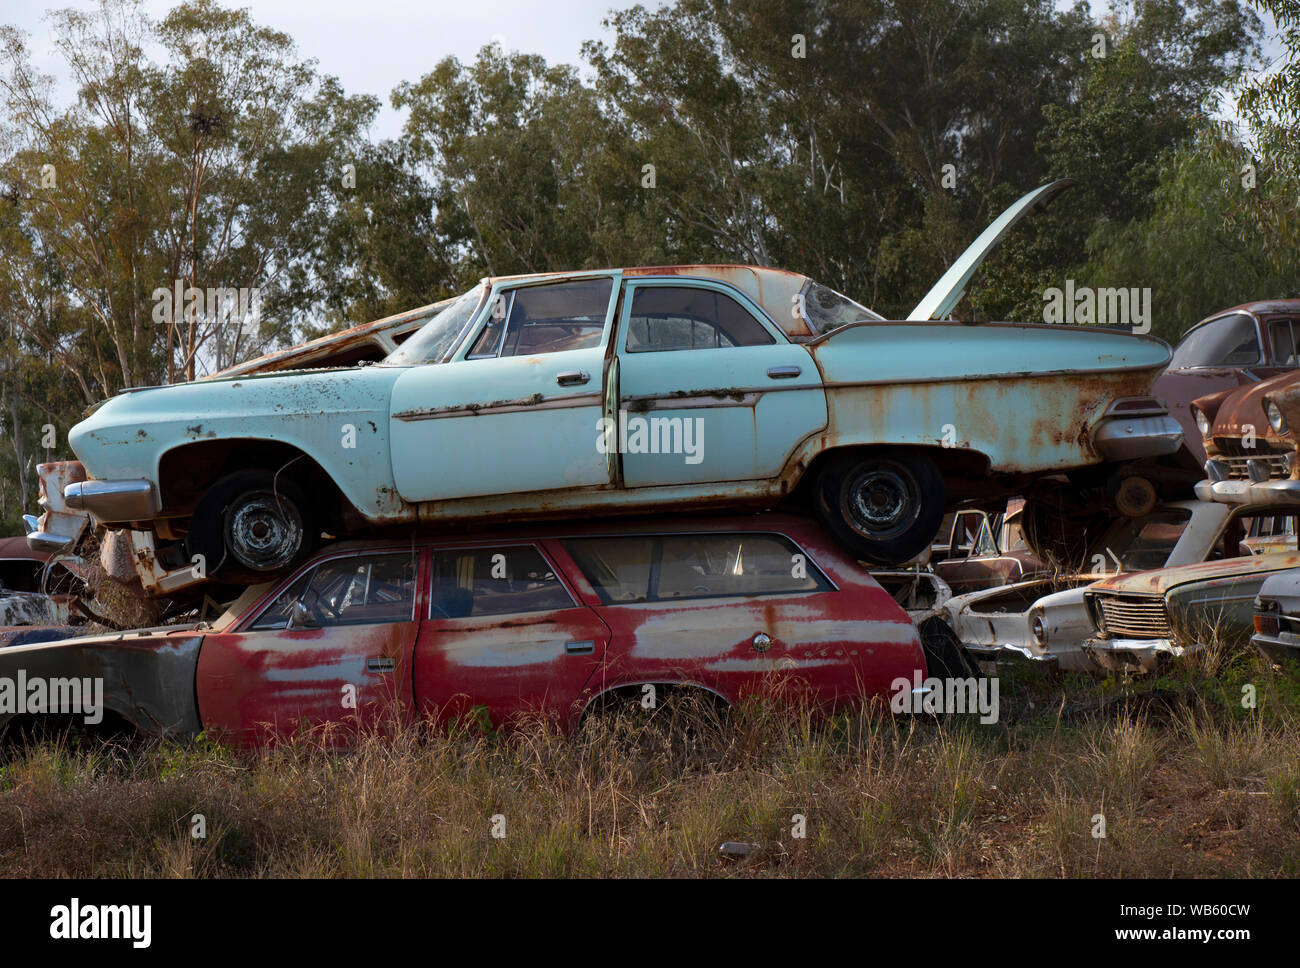 Rusty old cars from the 1950s and 1960s abandoned in a wrecking yard car graveyard in rural Australia. Stock Photo